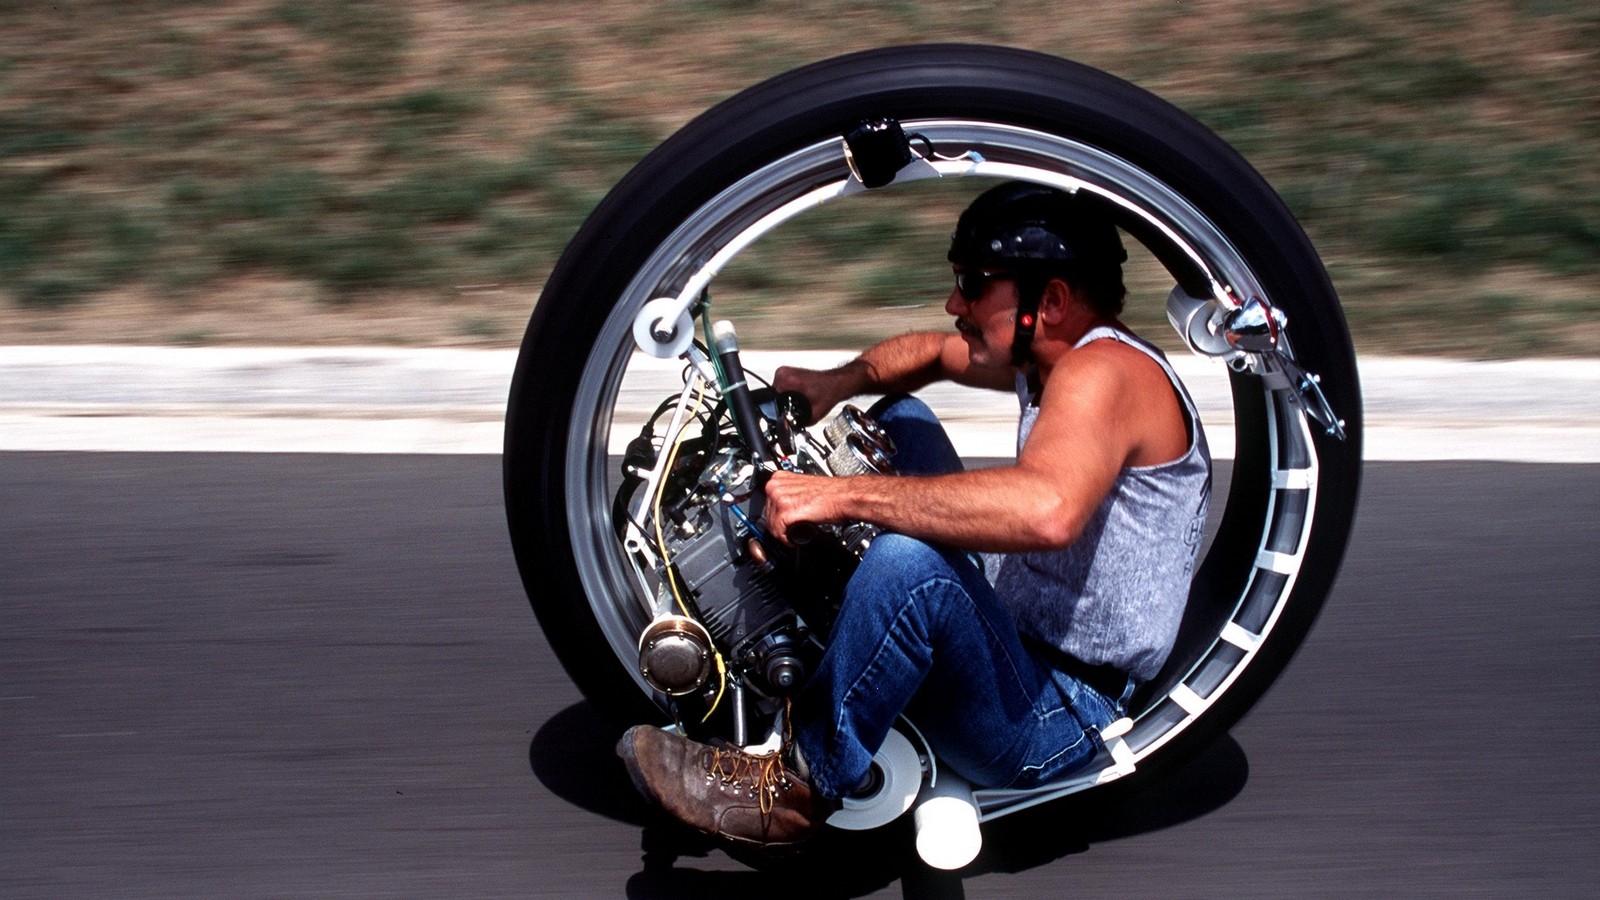 Kerry McLean And His Monocycle